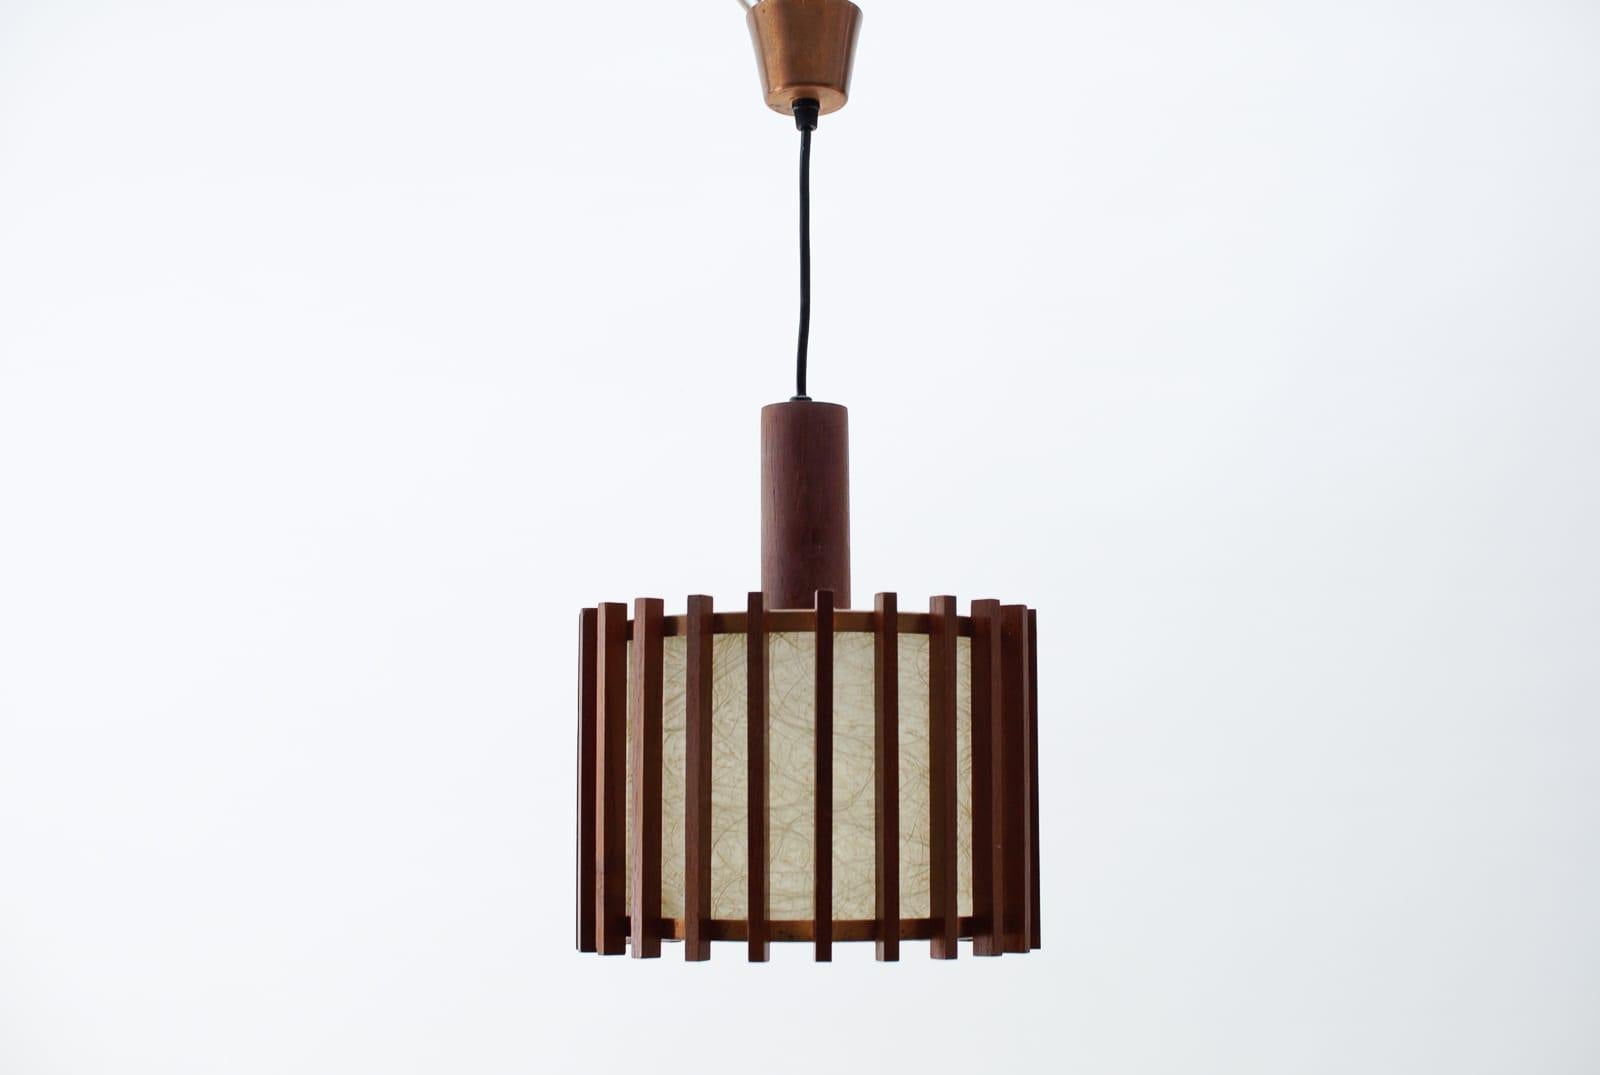 Executed in teak wood, copper and metal, each lamp needs 1 x E27 / E26 Edison screw fit bulb, is wired, in working condition and runs both on 110 / 230 volt.

Our lamps are checked, cleaned and are suitable for use in the USA.